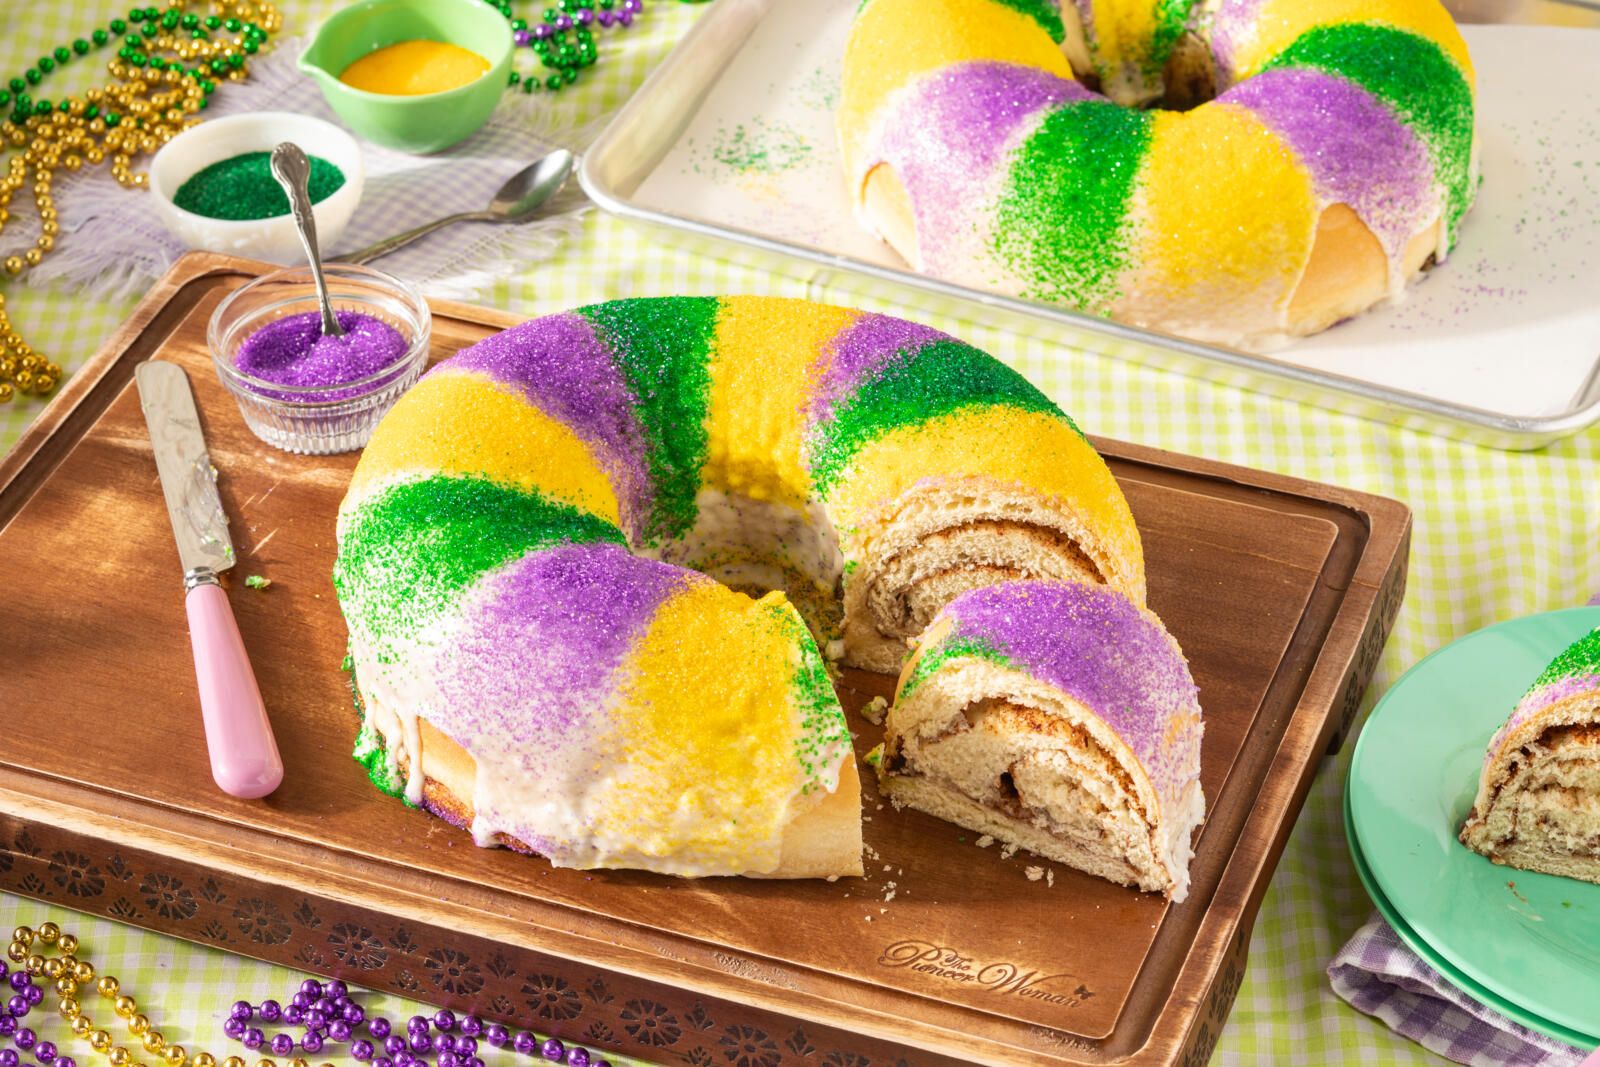 What Is a King Cake? - The History of Mardi Gras King Cake